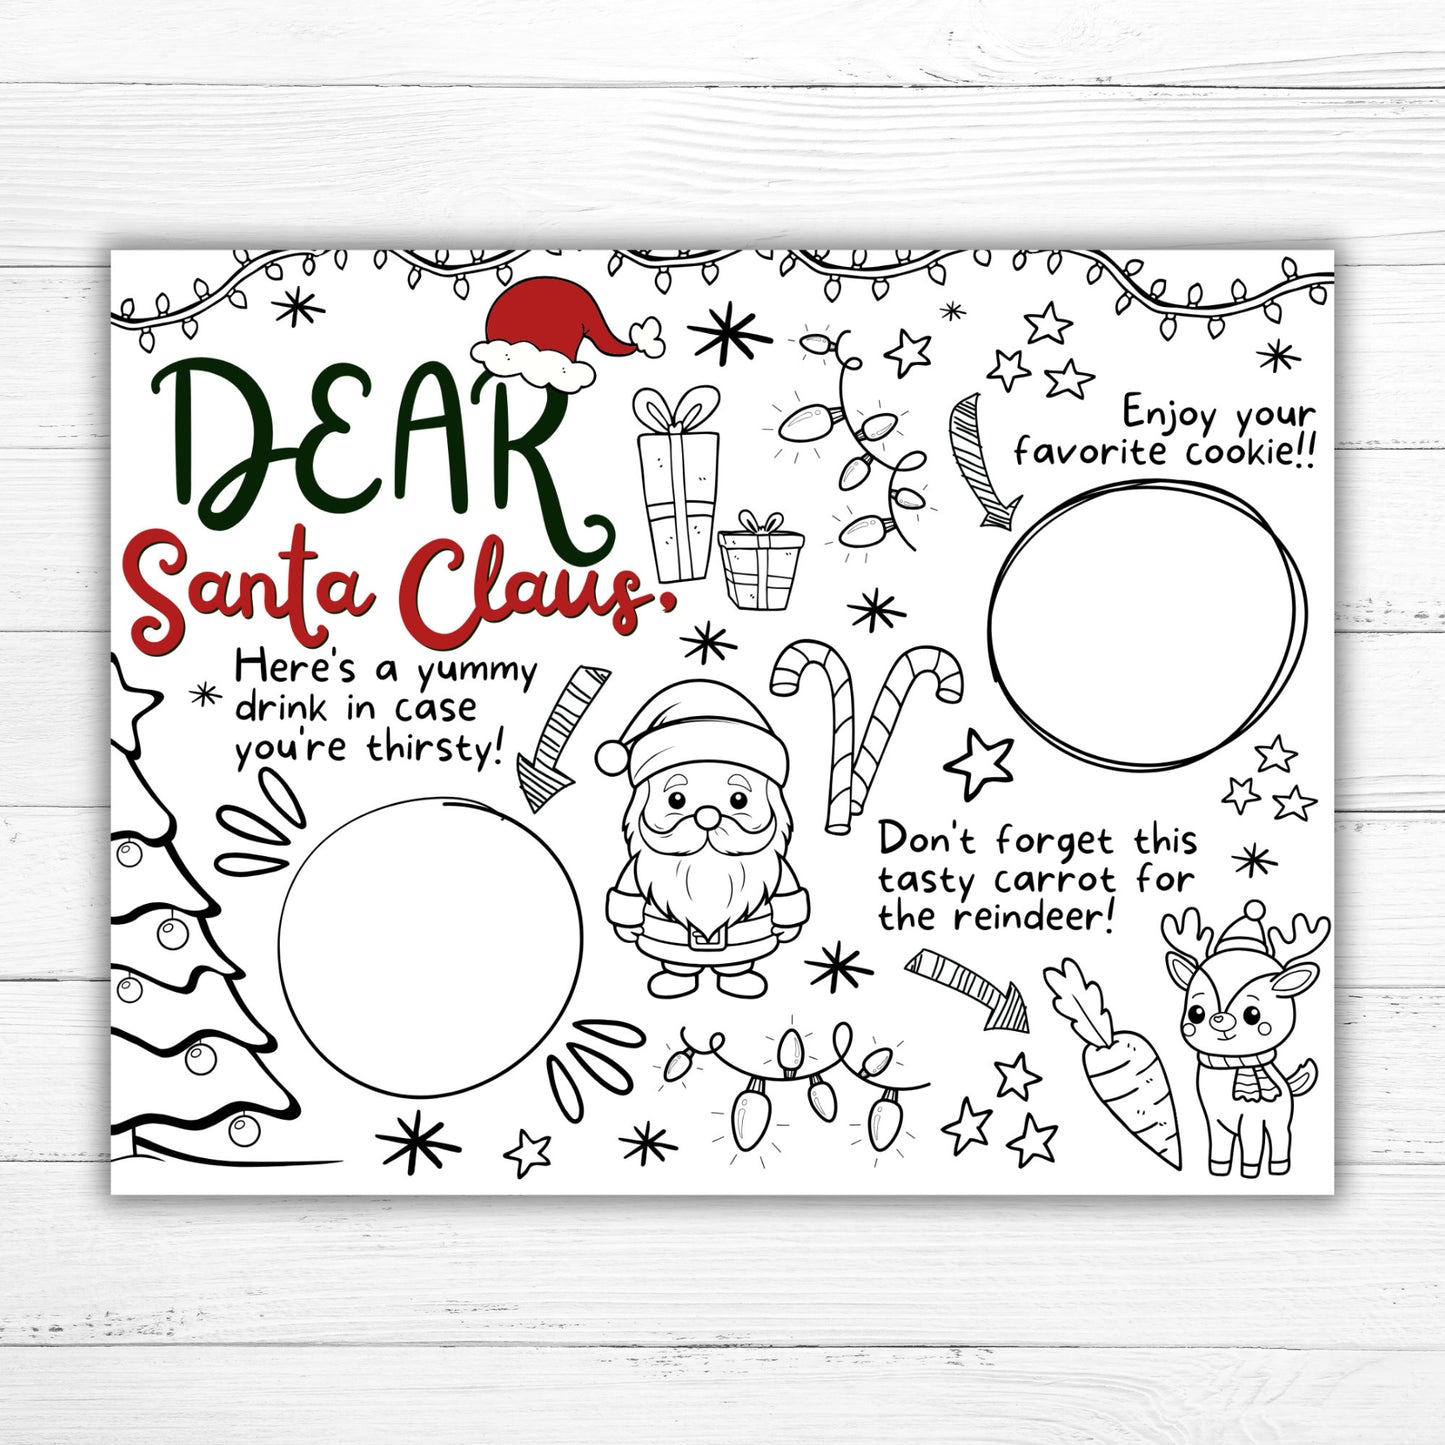 Christmas Placemat Activity Pack, Printable Christmas Placemats, Christmas Activities for Kids, Christmas Worksheets, Christmas Printables